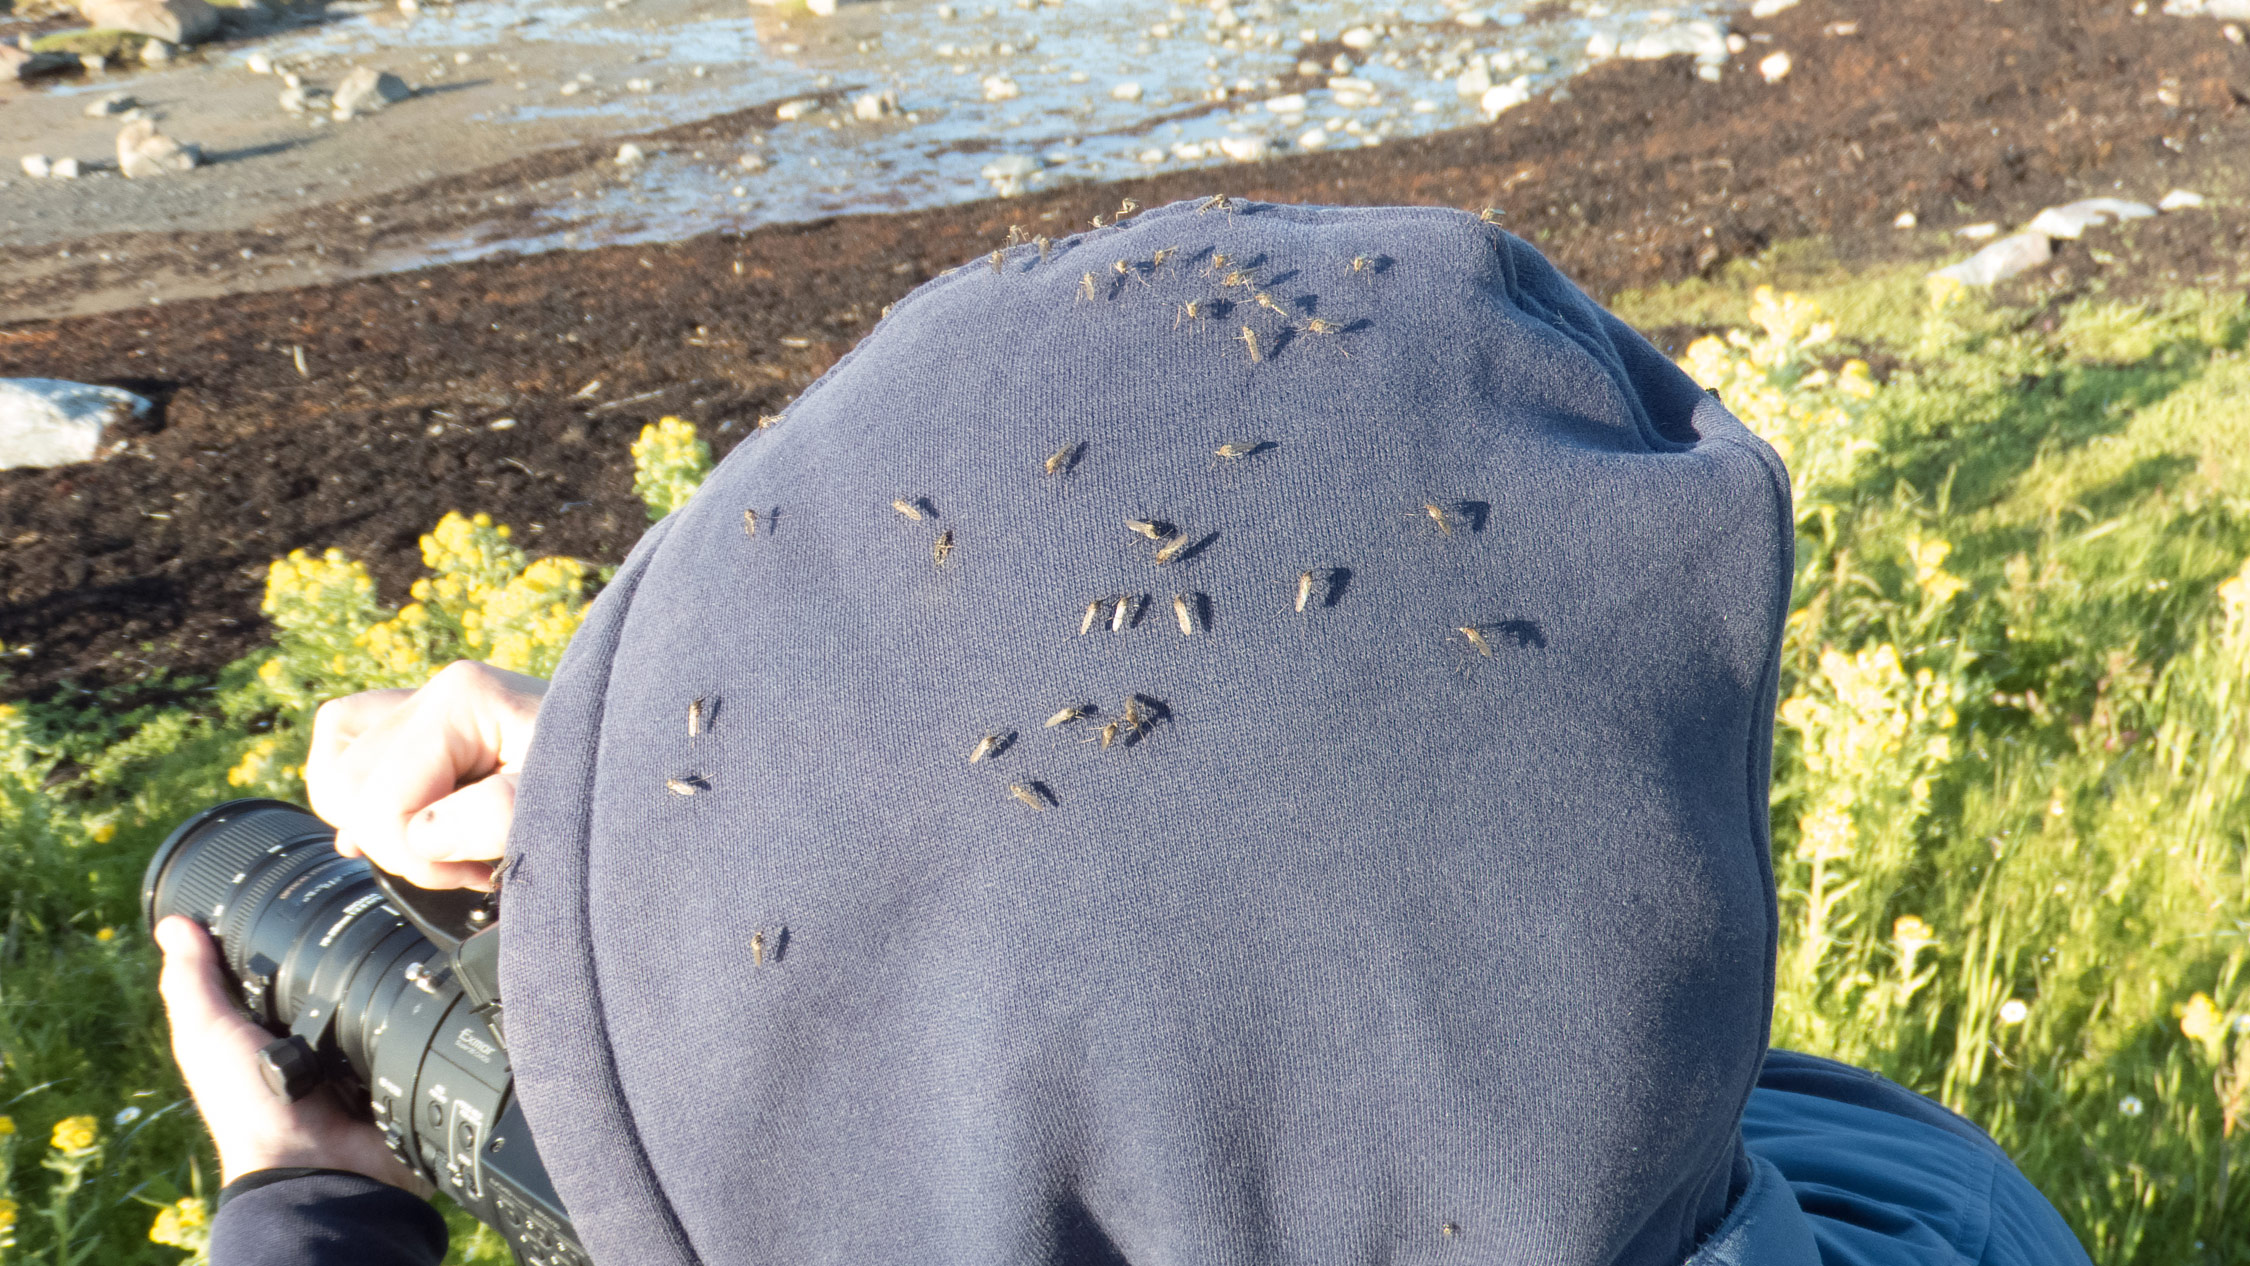 One of the hazards of the job during the Arctic summer: mosquitoes